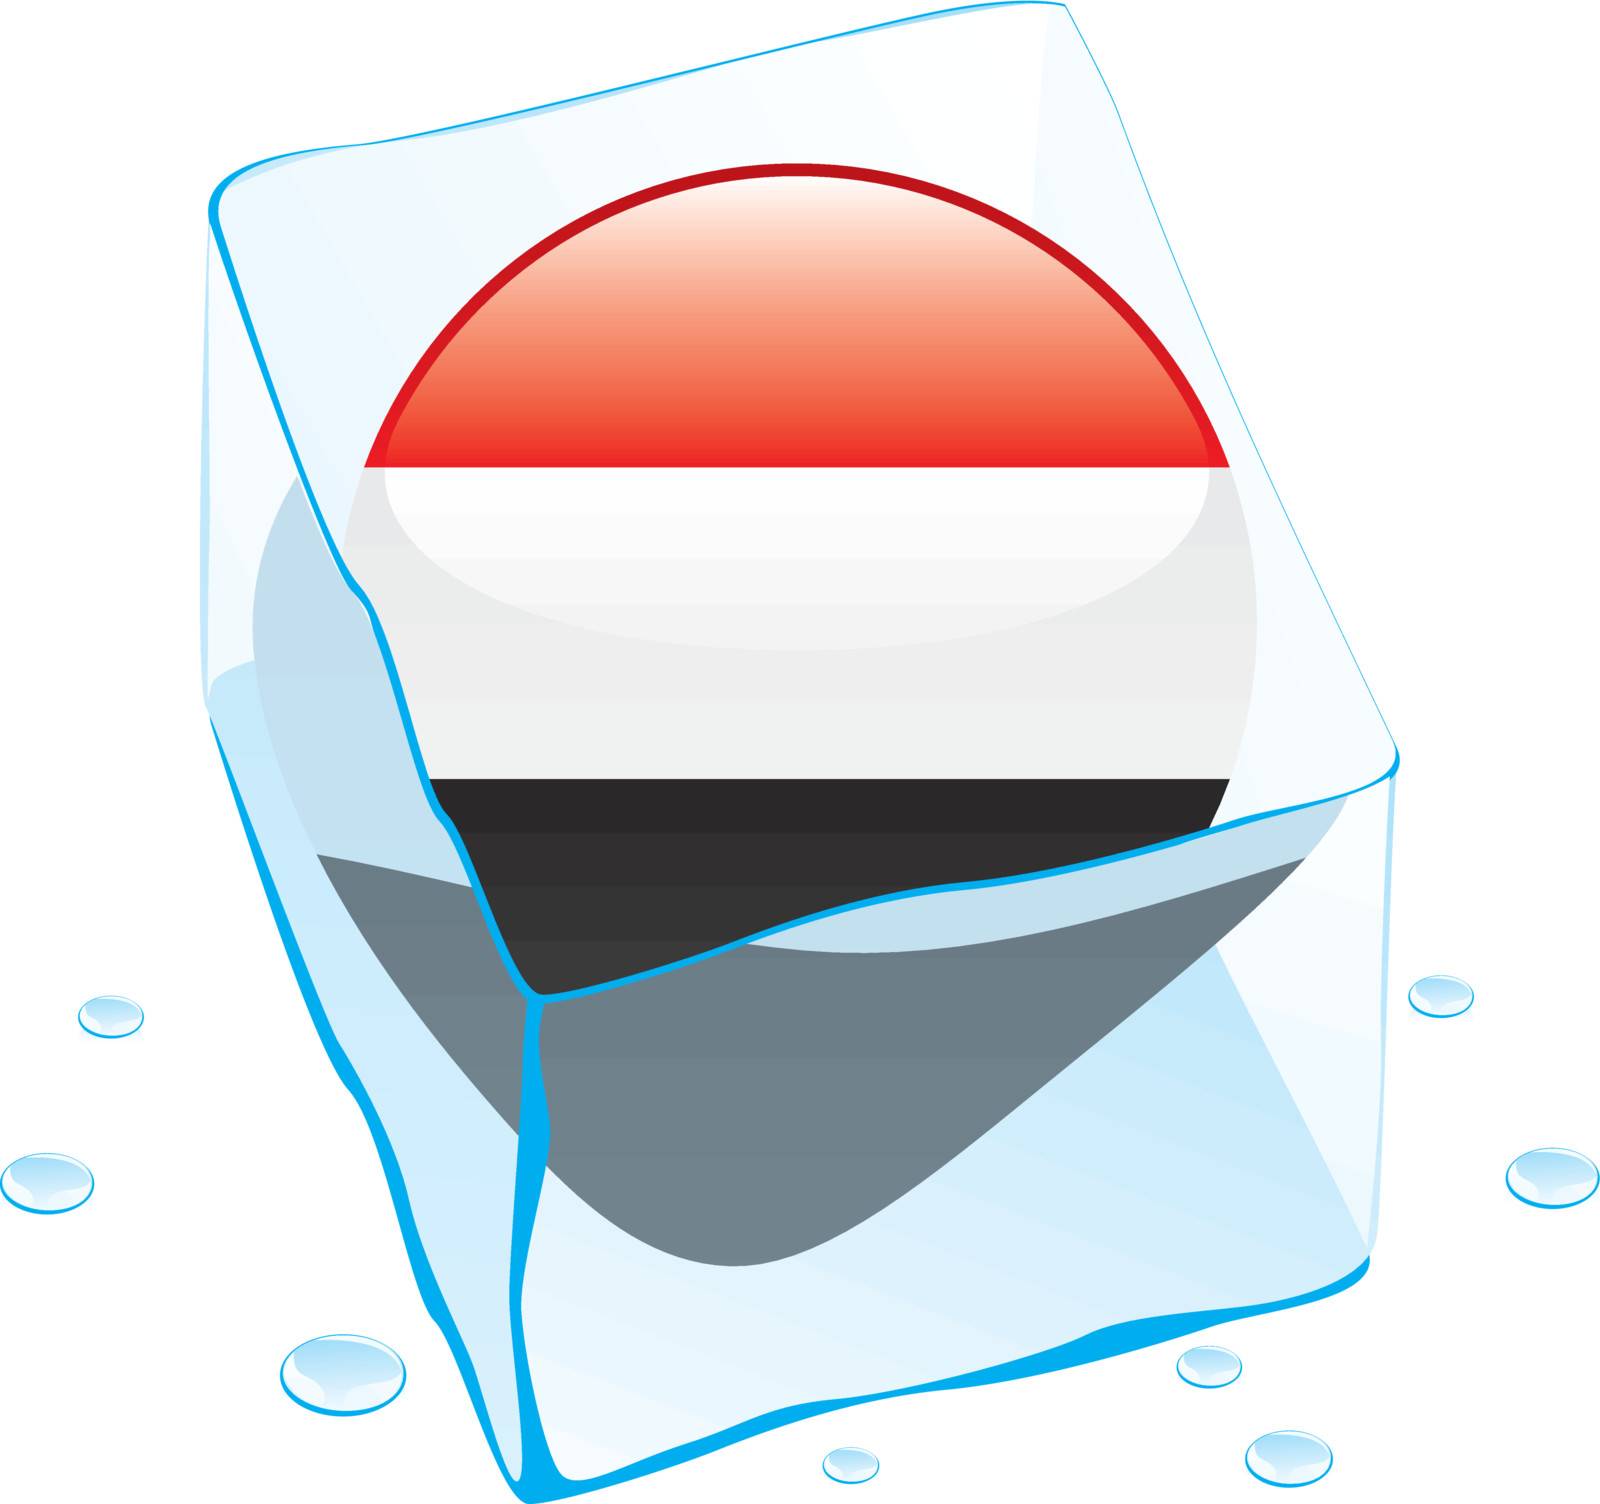 fully editable vector illustration of egypt button flag frozen in ice cube